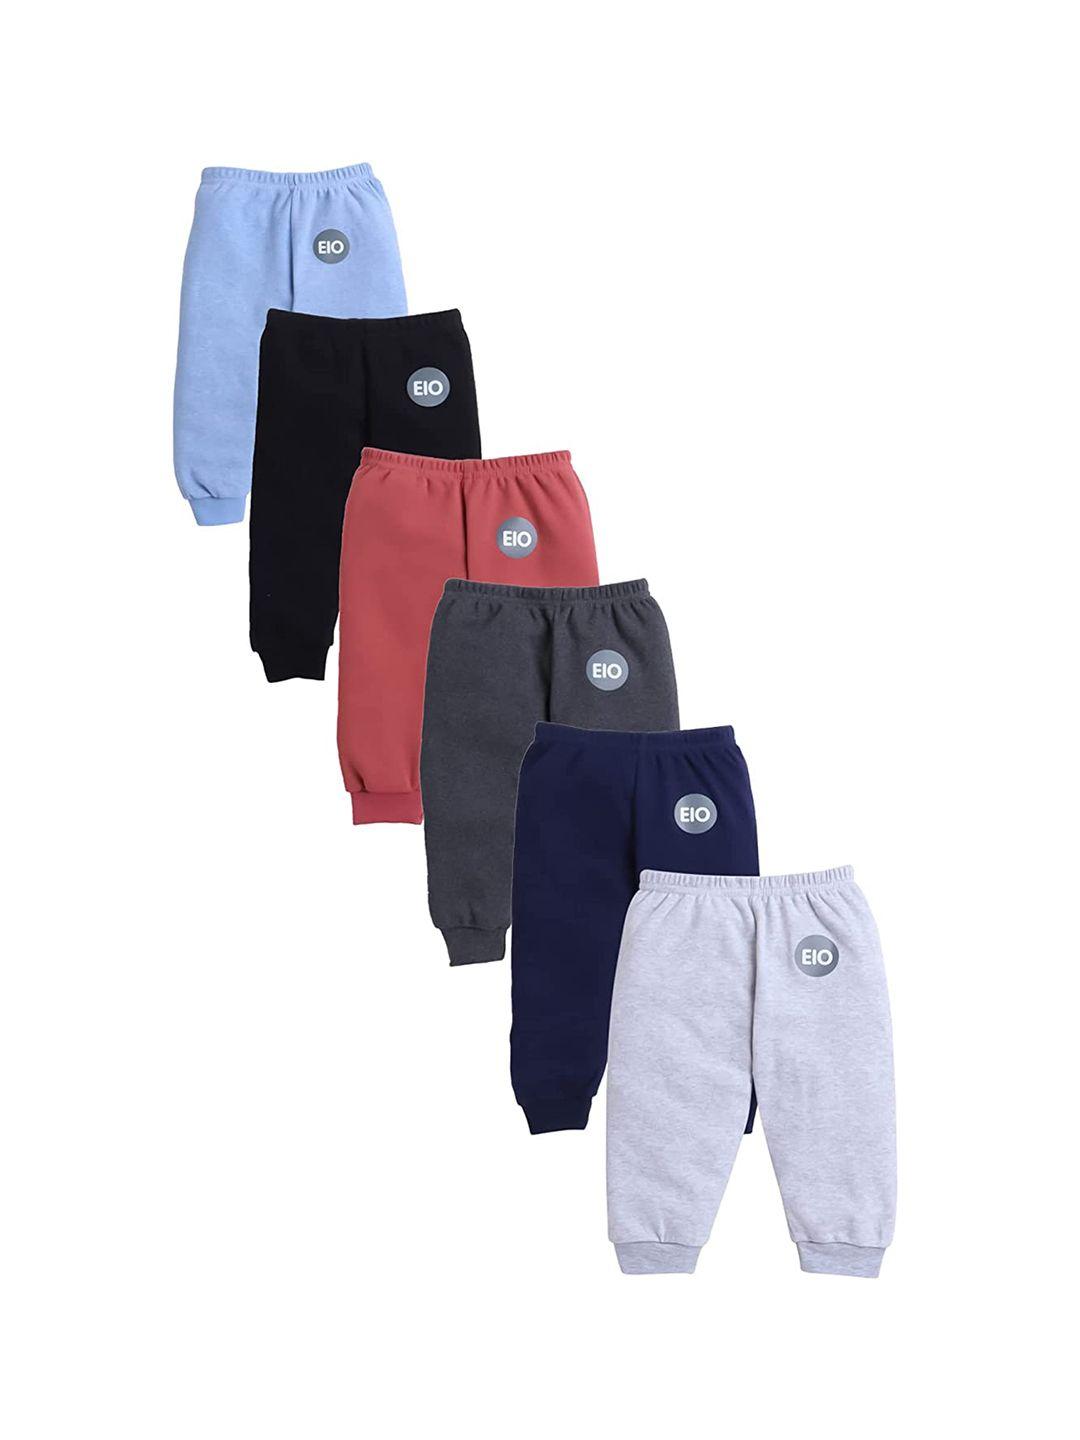 eio kids solid pack of 6 cotton track pants